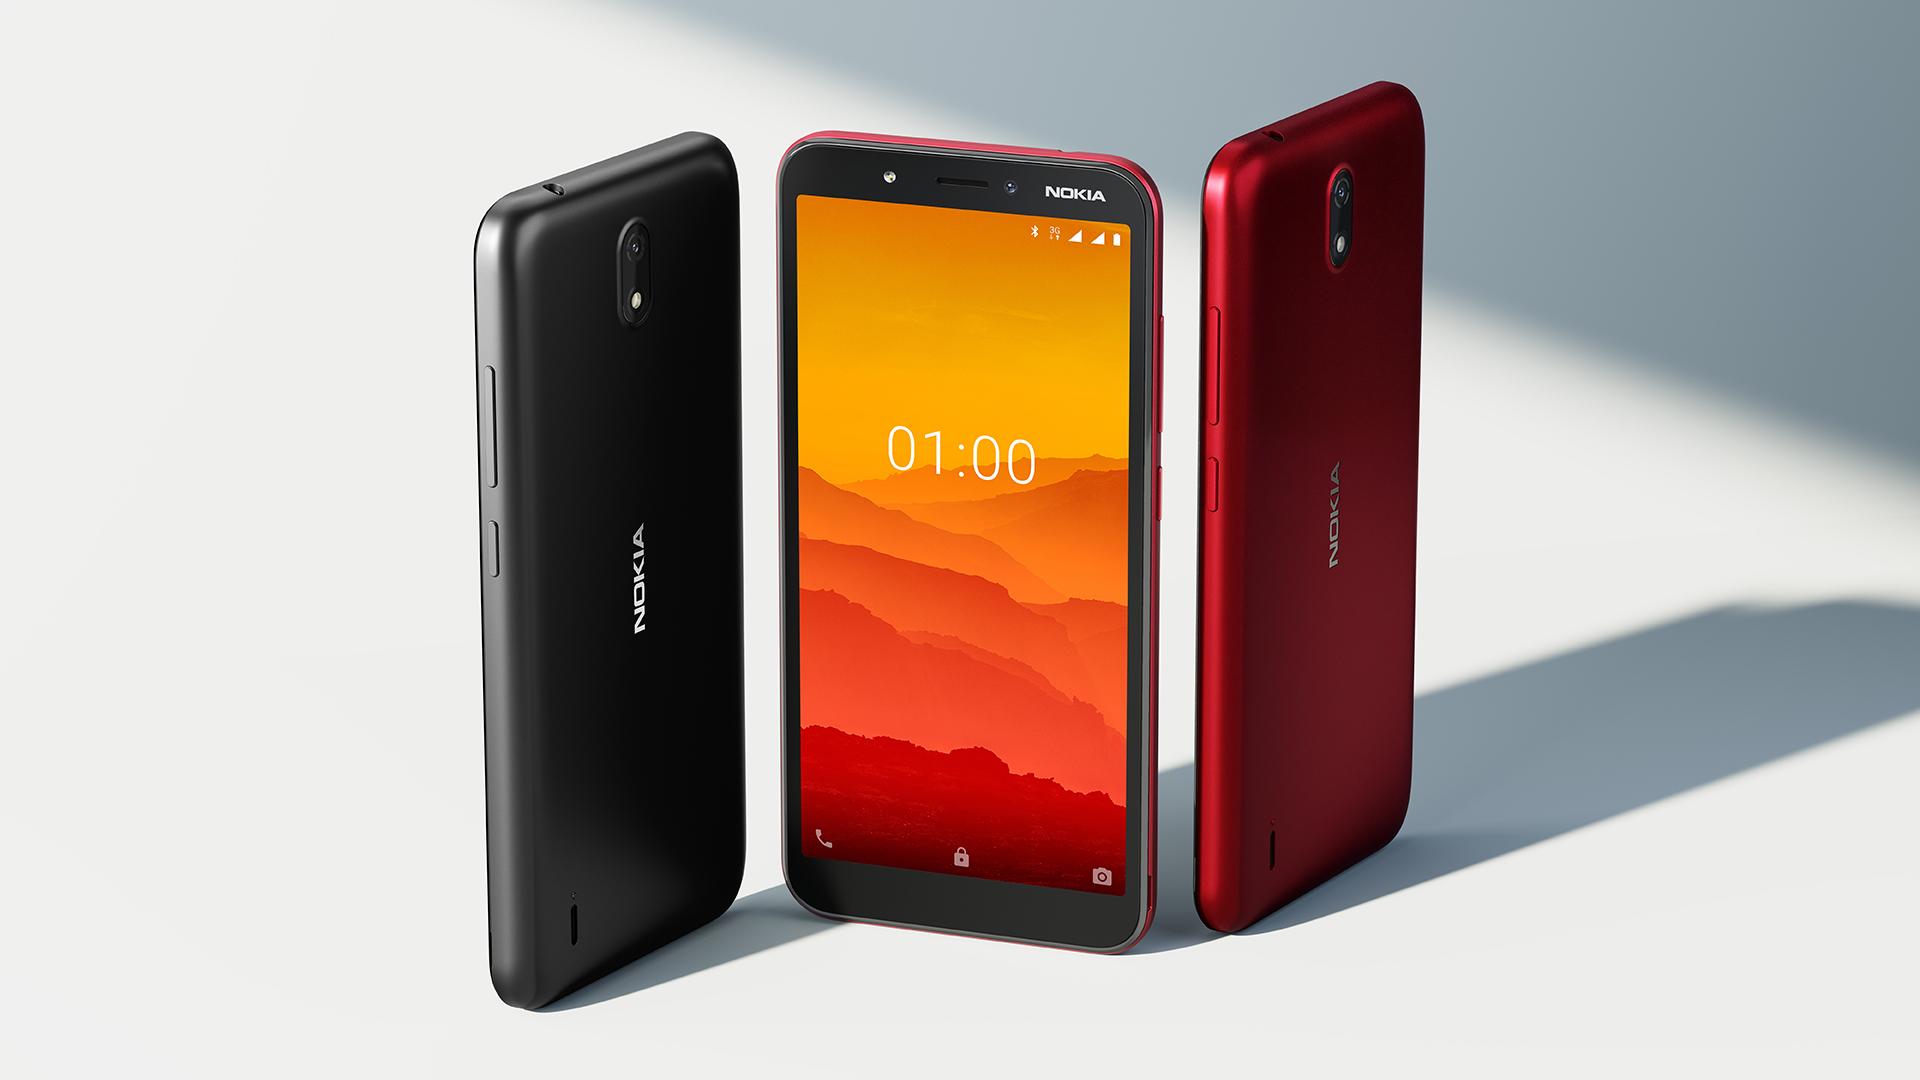 Level up to a quality smartphone experience with the new Nokia C1